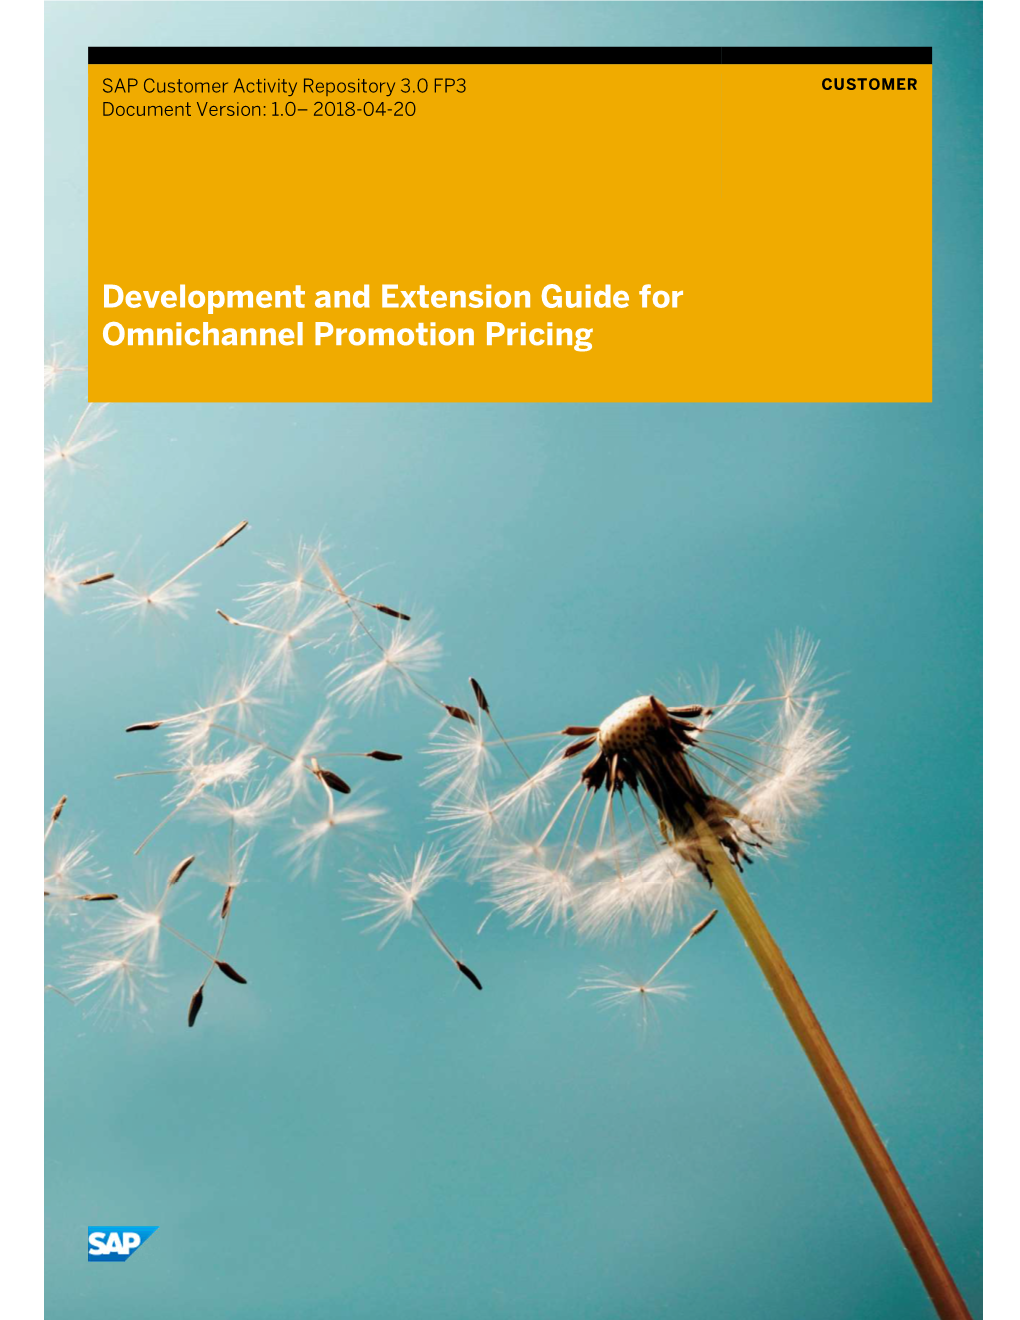 Development and Extension Guide for Omnichannel Promotion Pricing